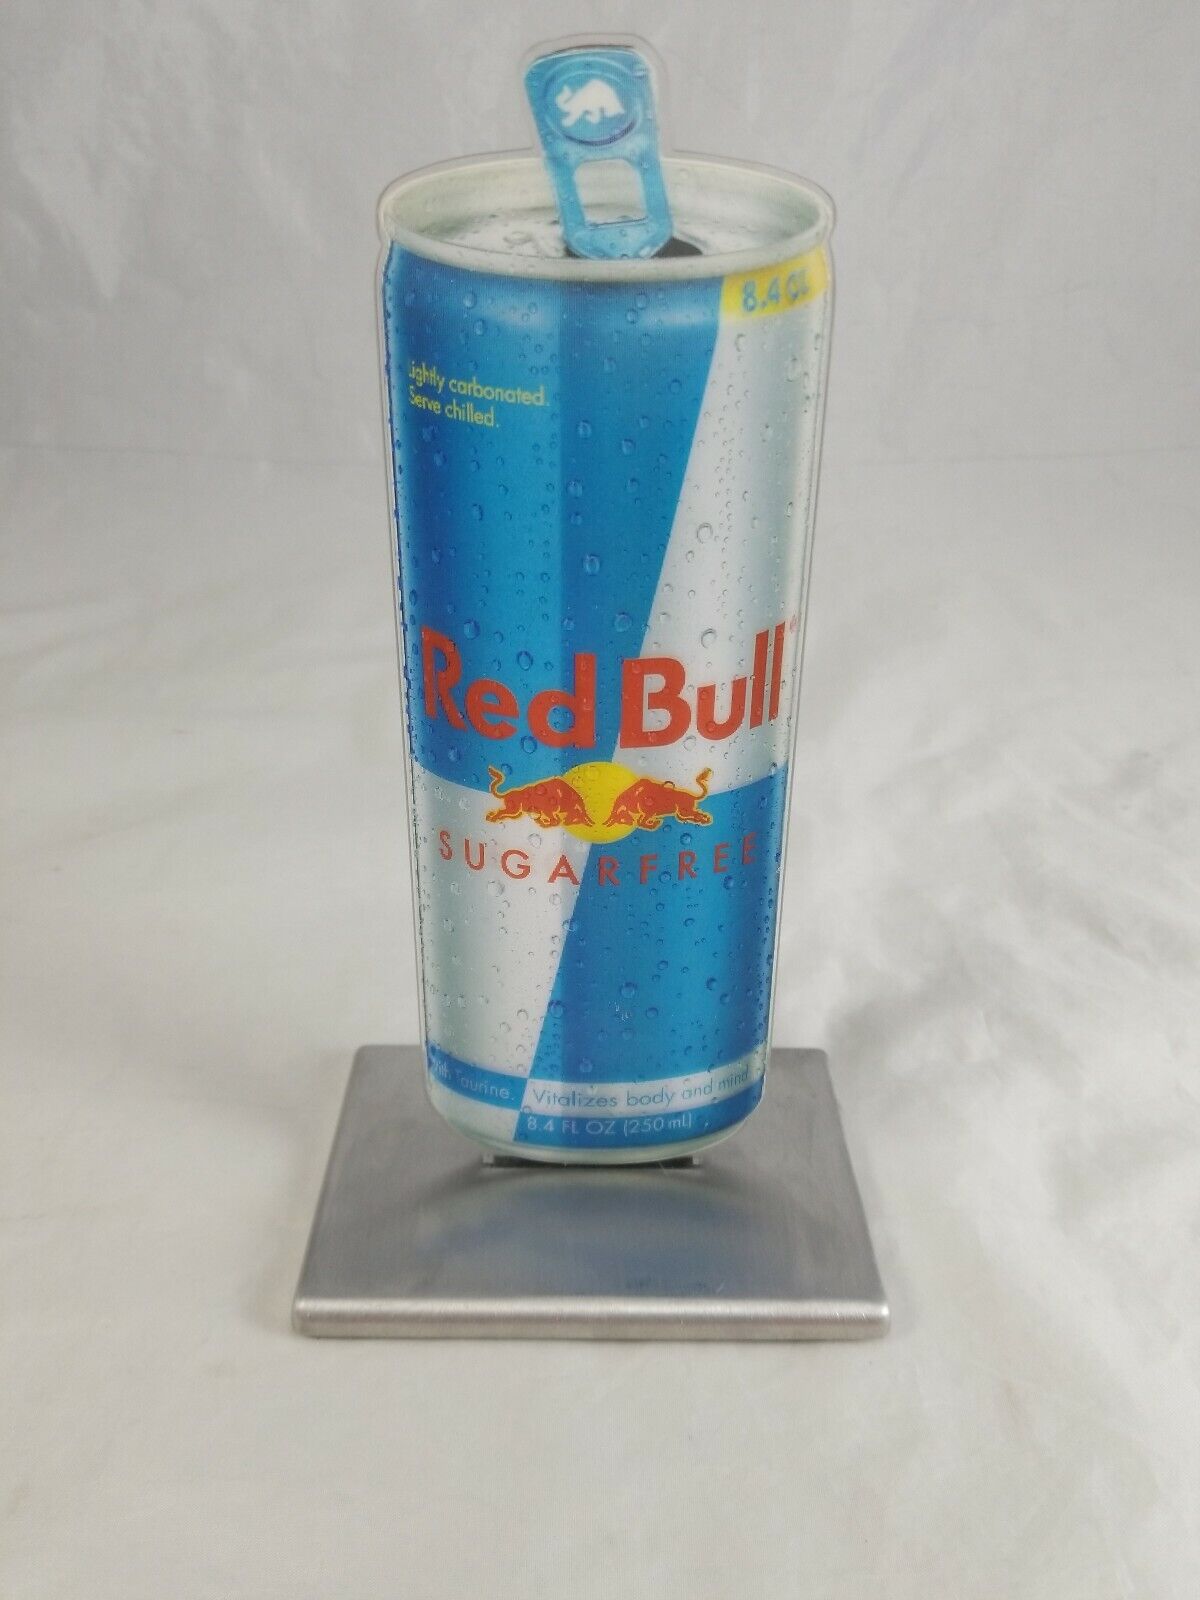 Red Bull Store Display Stand Advertisement Holographic Sugarfree Energy Drink